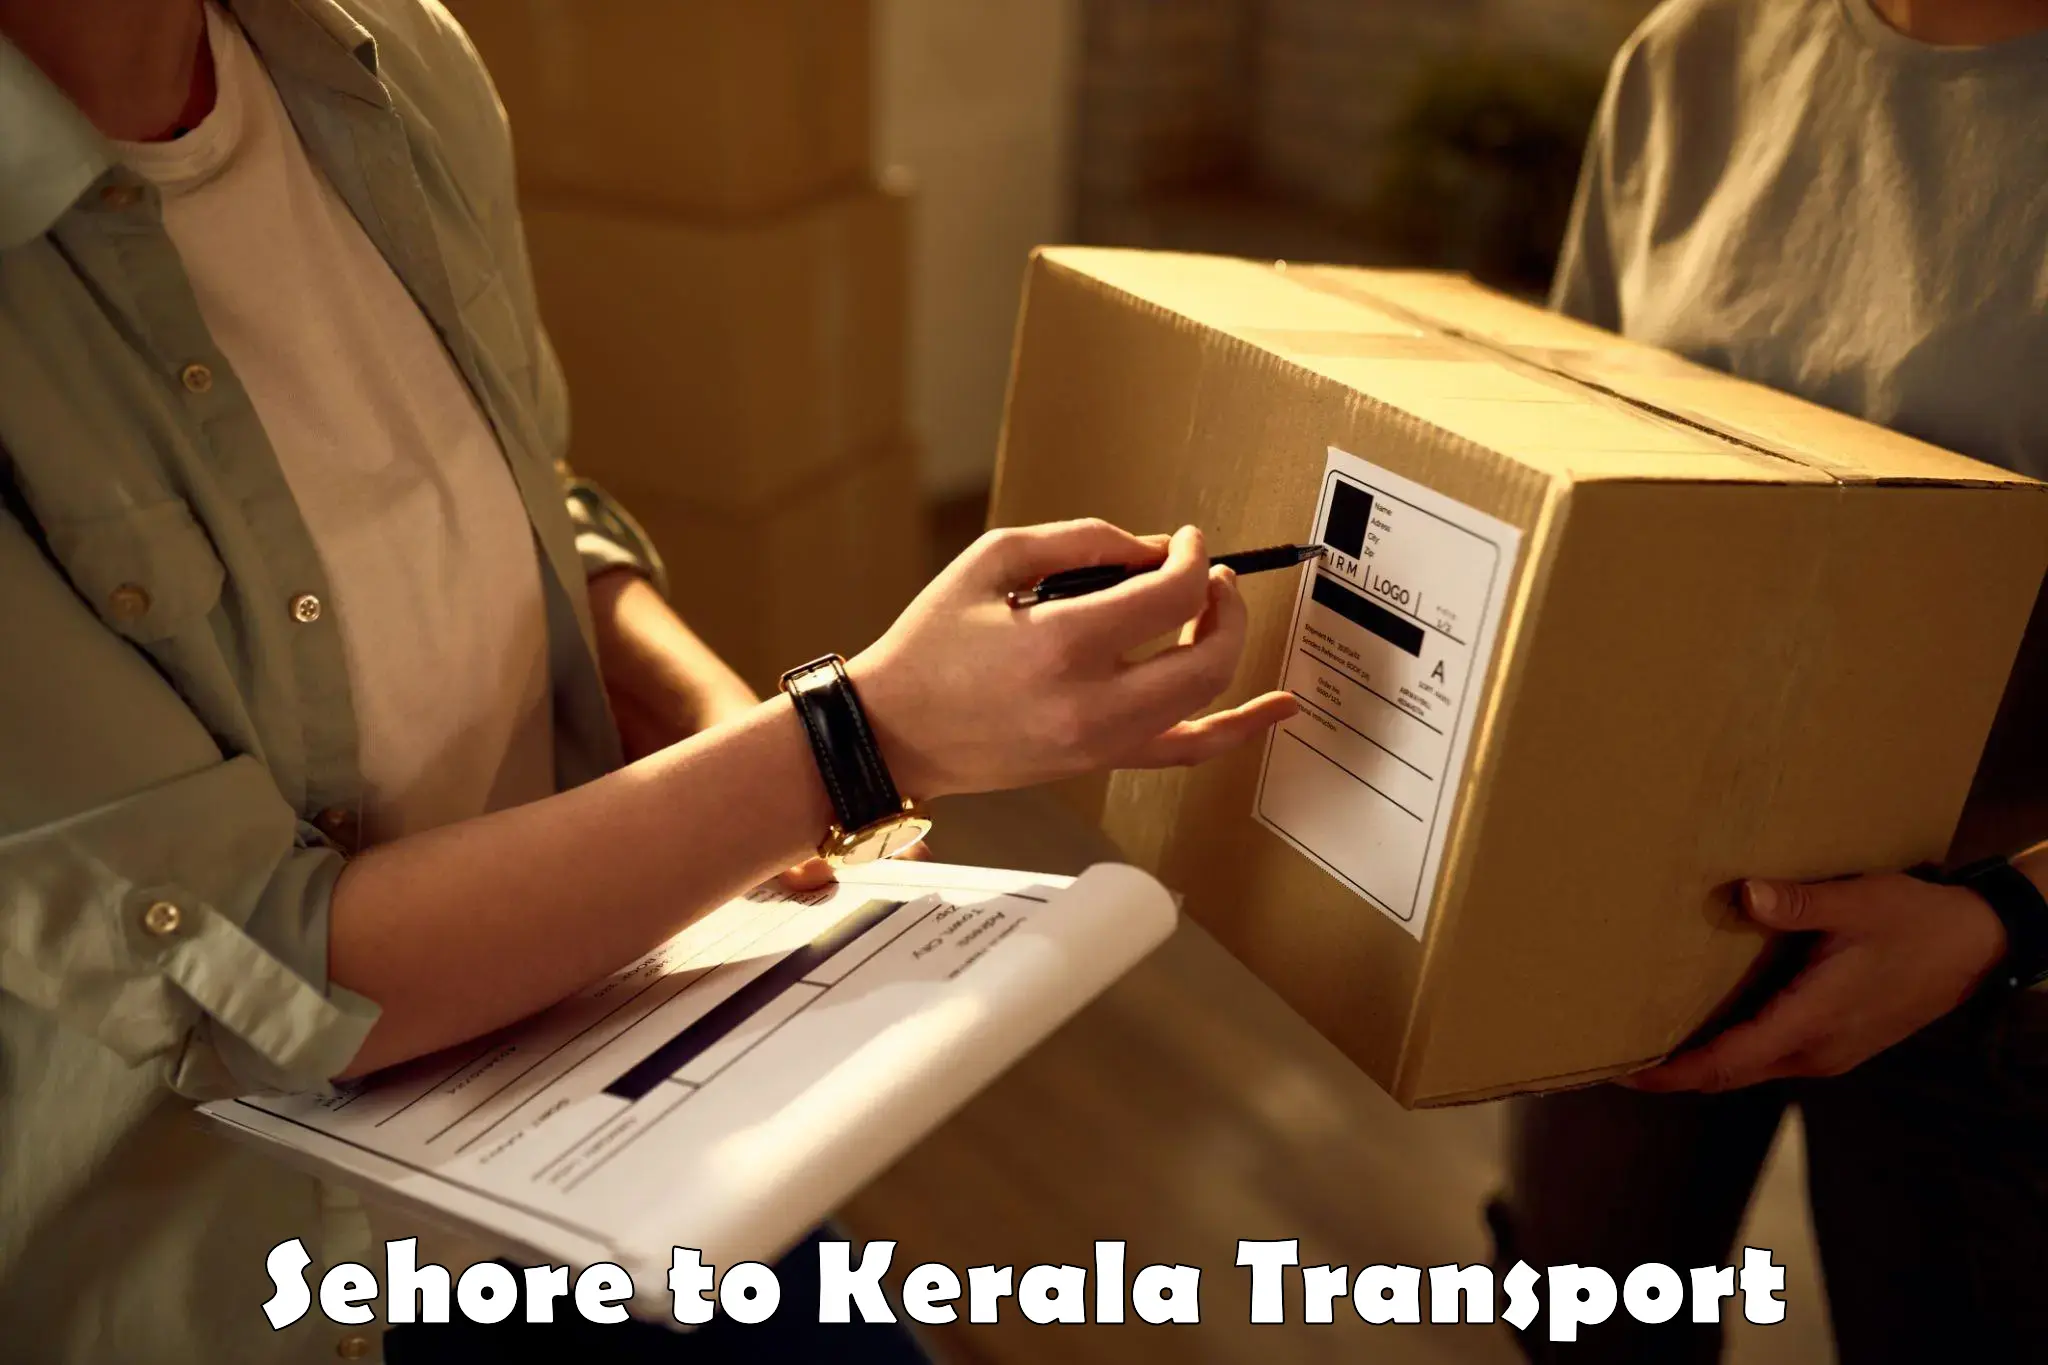 Commercial transport service Sehore to Perinthalmanna